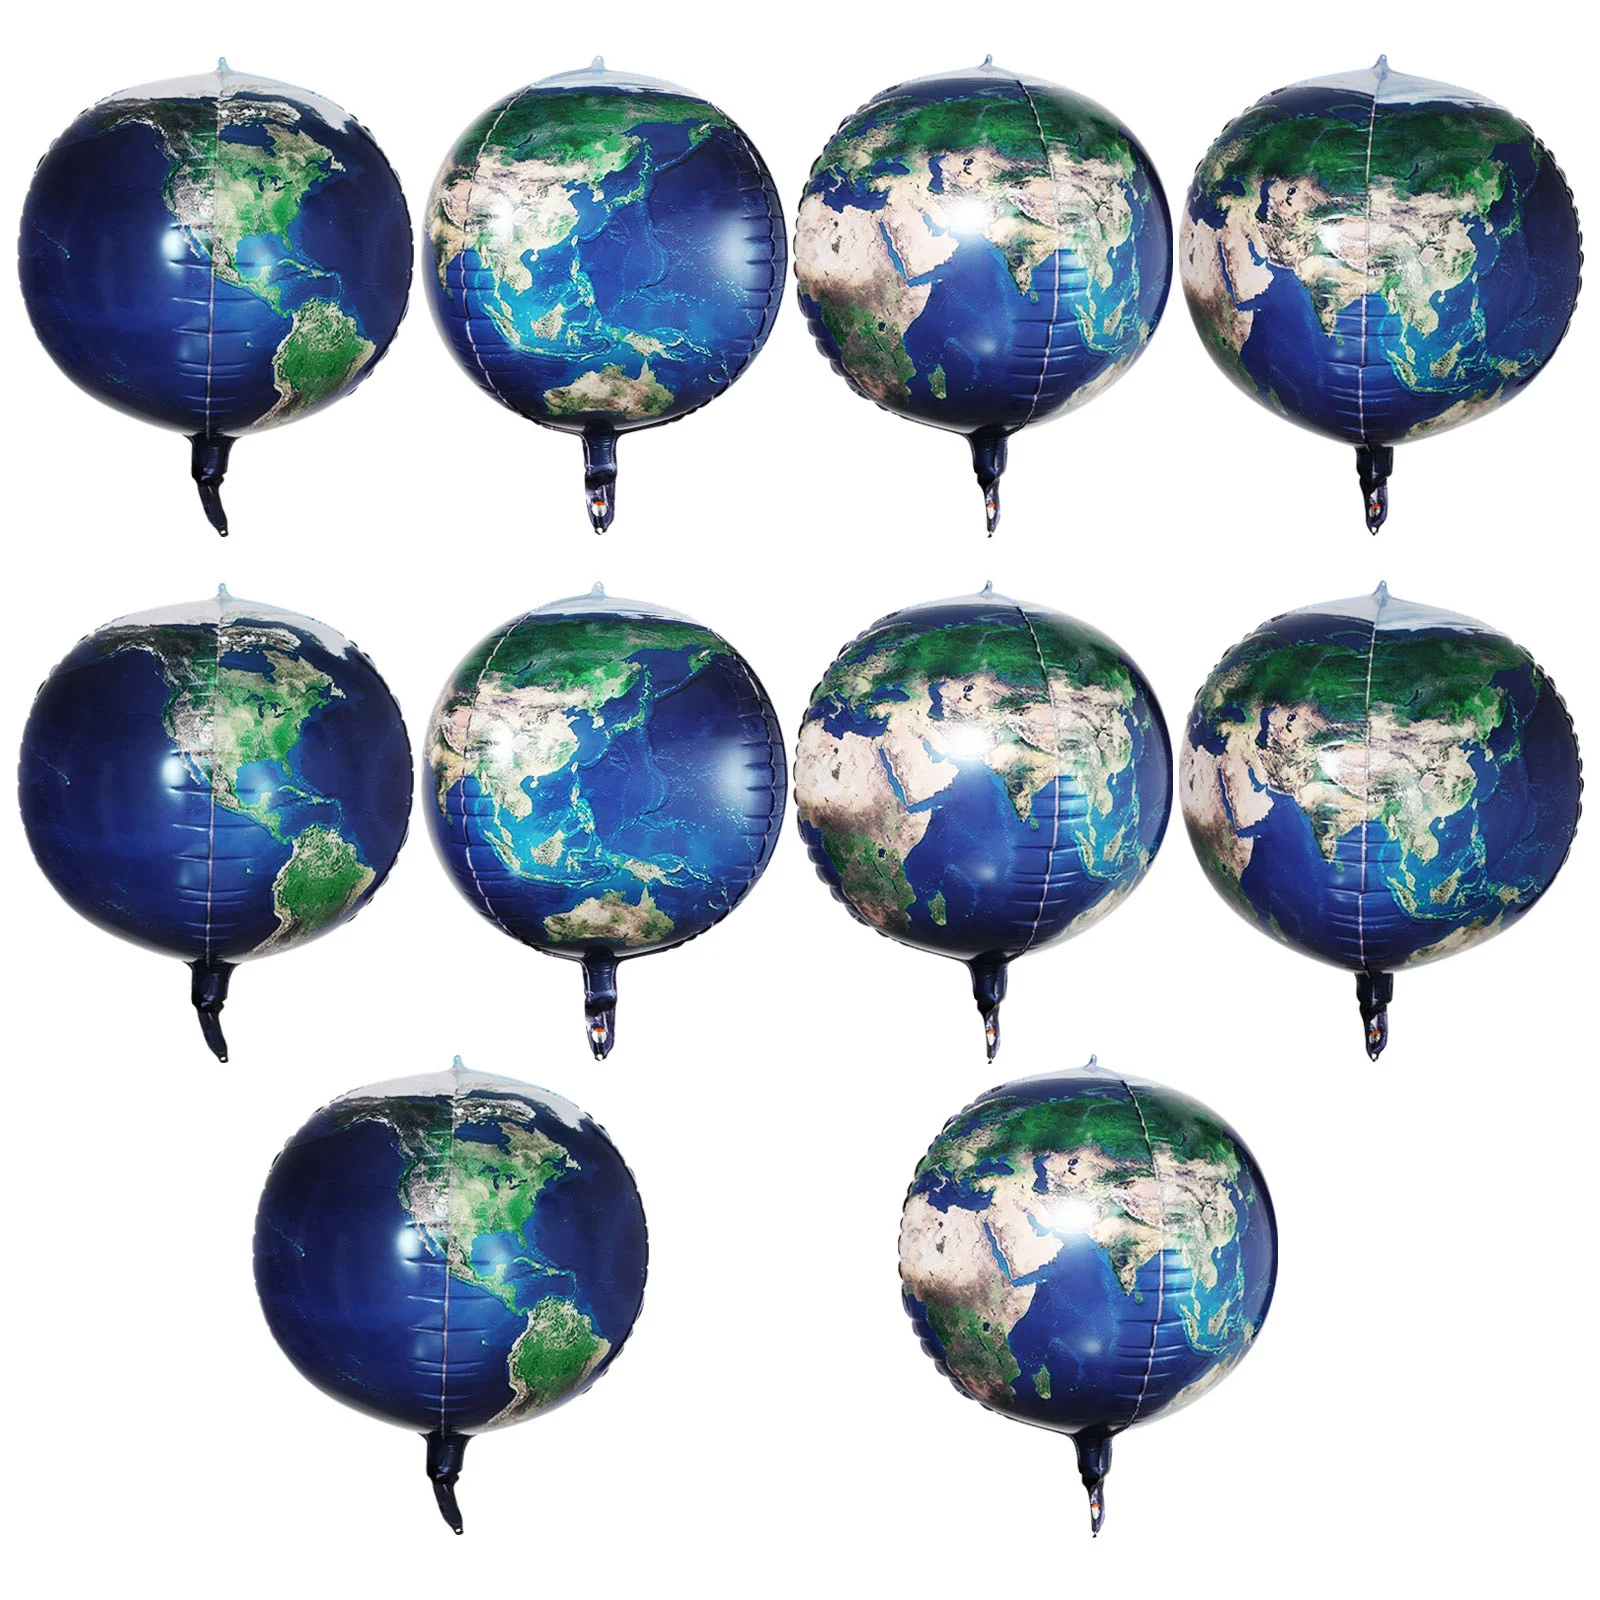 

Balloons Earth Day Globe Decorations Party World Planet Balloon Aluminum Sphere Map Favors Birthday Travel Decor Space Floatable